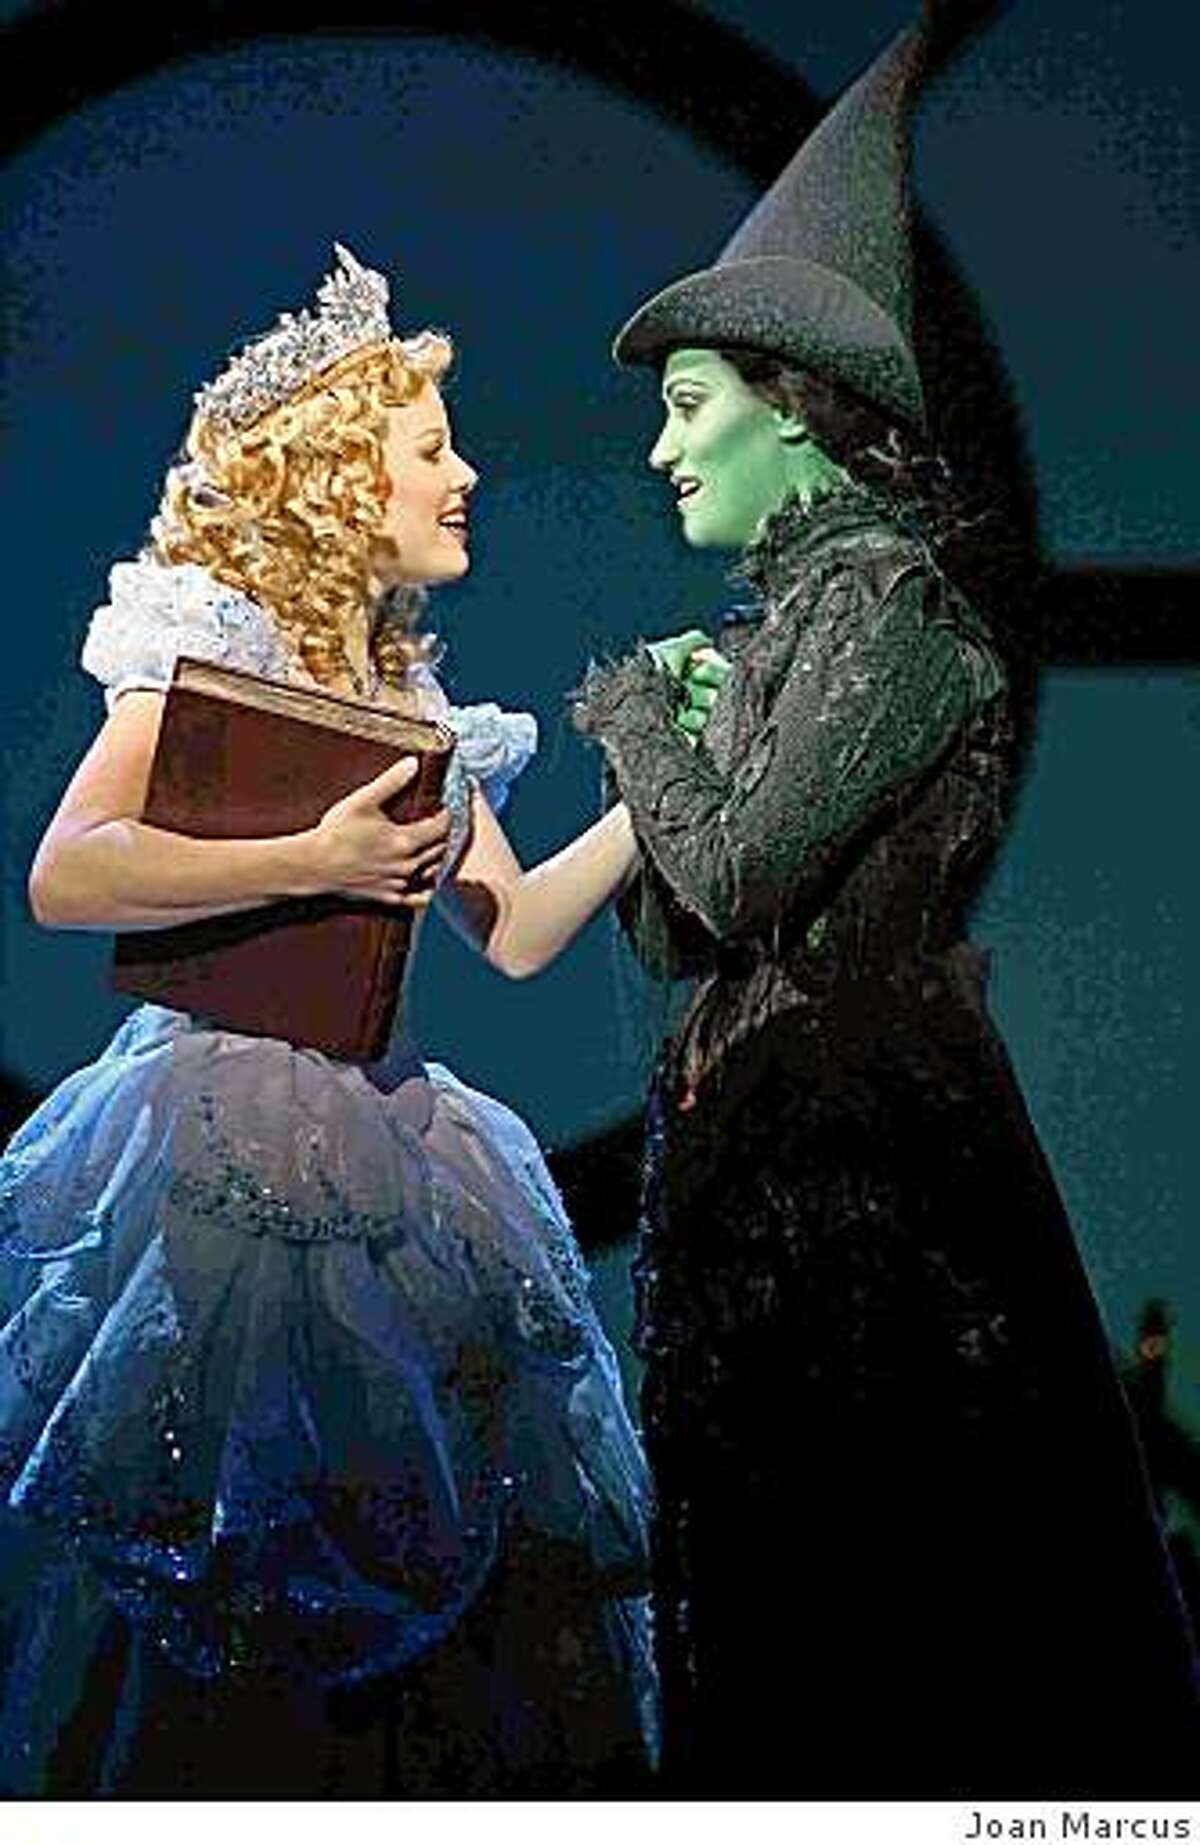 Megan Hilty as Glinda (left) and Eden Espinosa as Elphaba in the Los Angeles production of "Wicked."